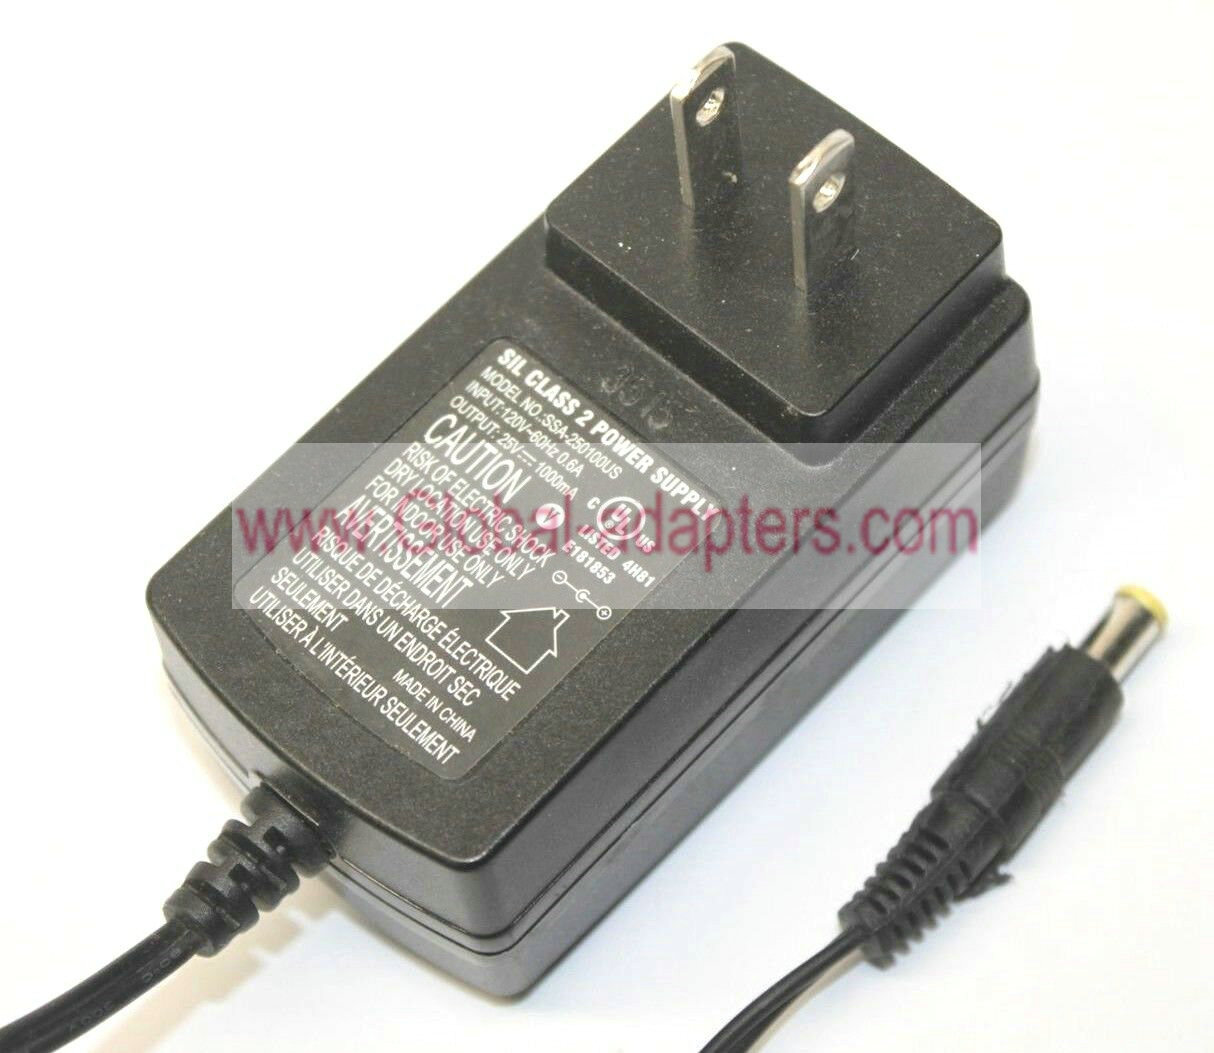 Brand New SIL SSA-250100US Class 2 Power Supply 25V 1000mA Adapter Transformer Charger